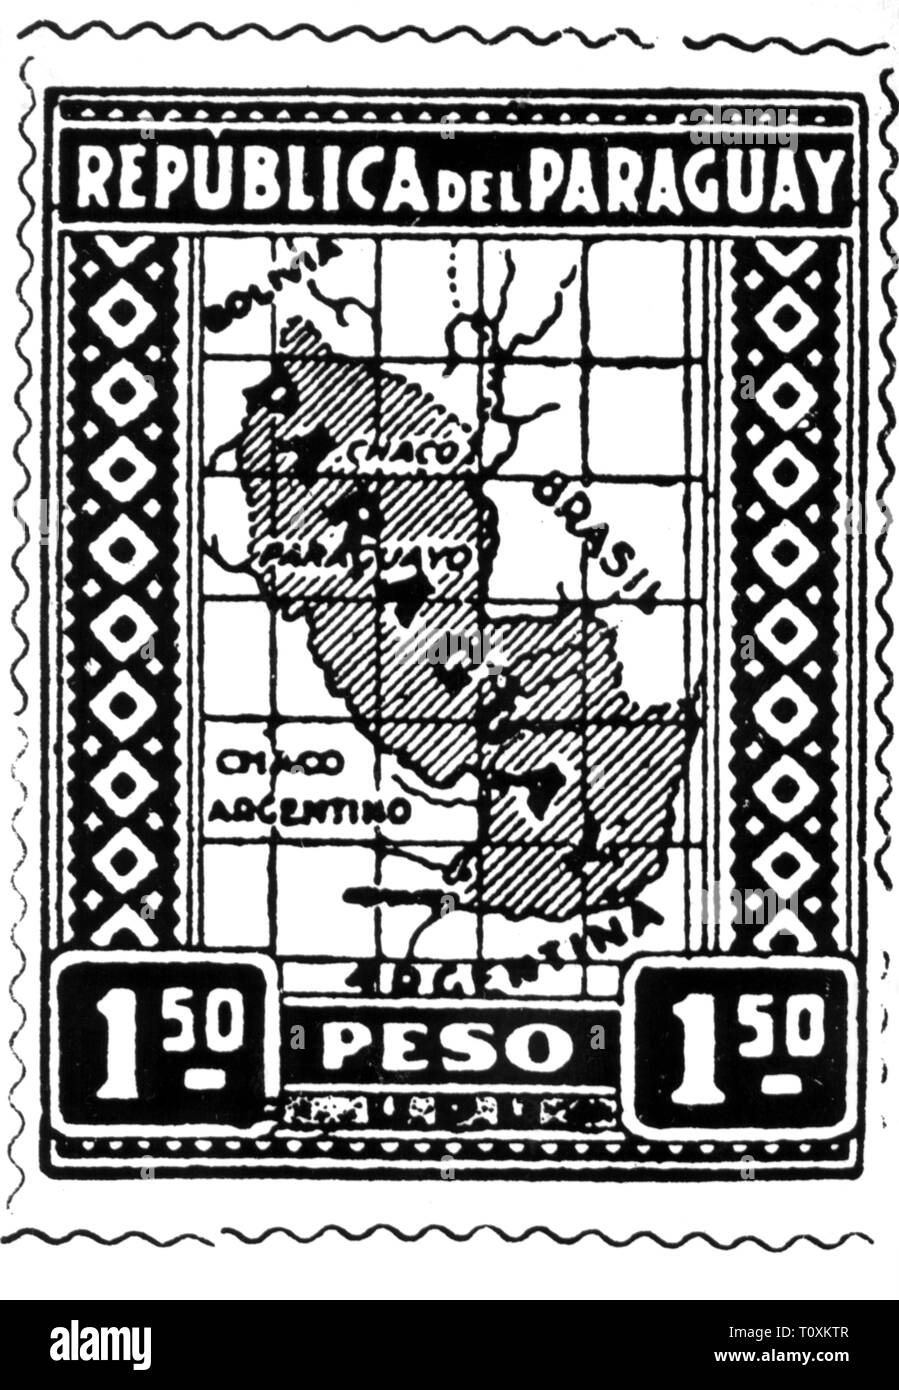 Mail, sellos, Paraguay, 1 peso 50 centavos Postage Stamp, mapa, fecha de emisión: 1927-Clearance-Info-Not-Available Additional-Rights Foto de stock